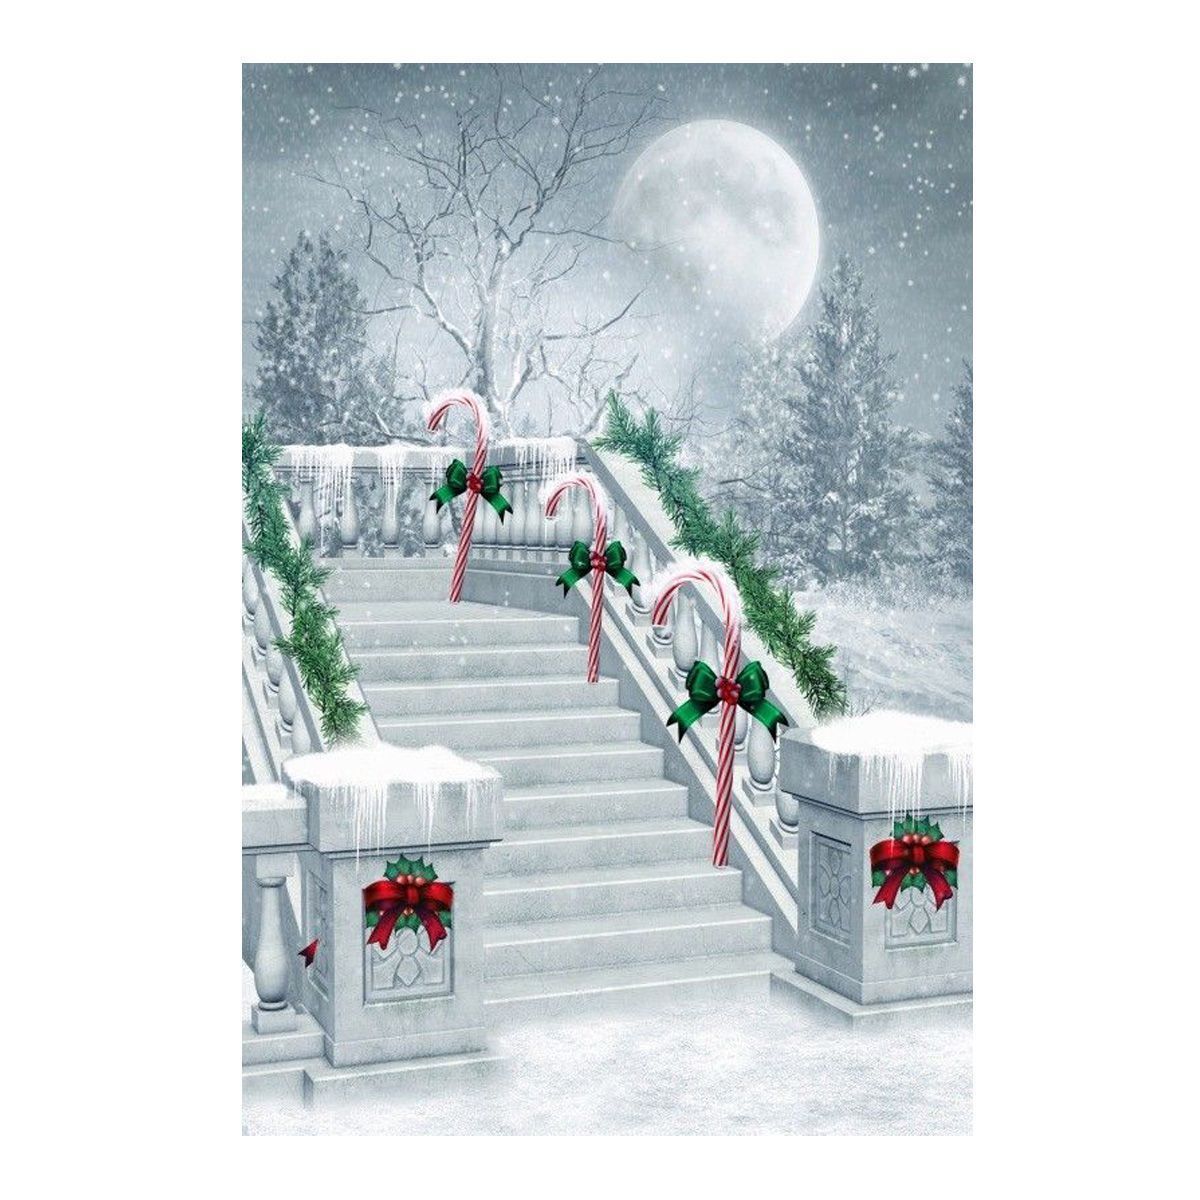 3x5FT-Christmas-Snowy-Street-Ladder-Photography-Backdrop-Studio-Prop-Background-1394510